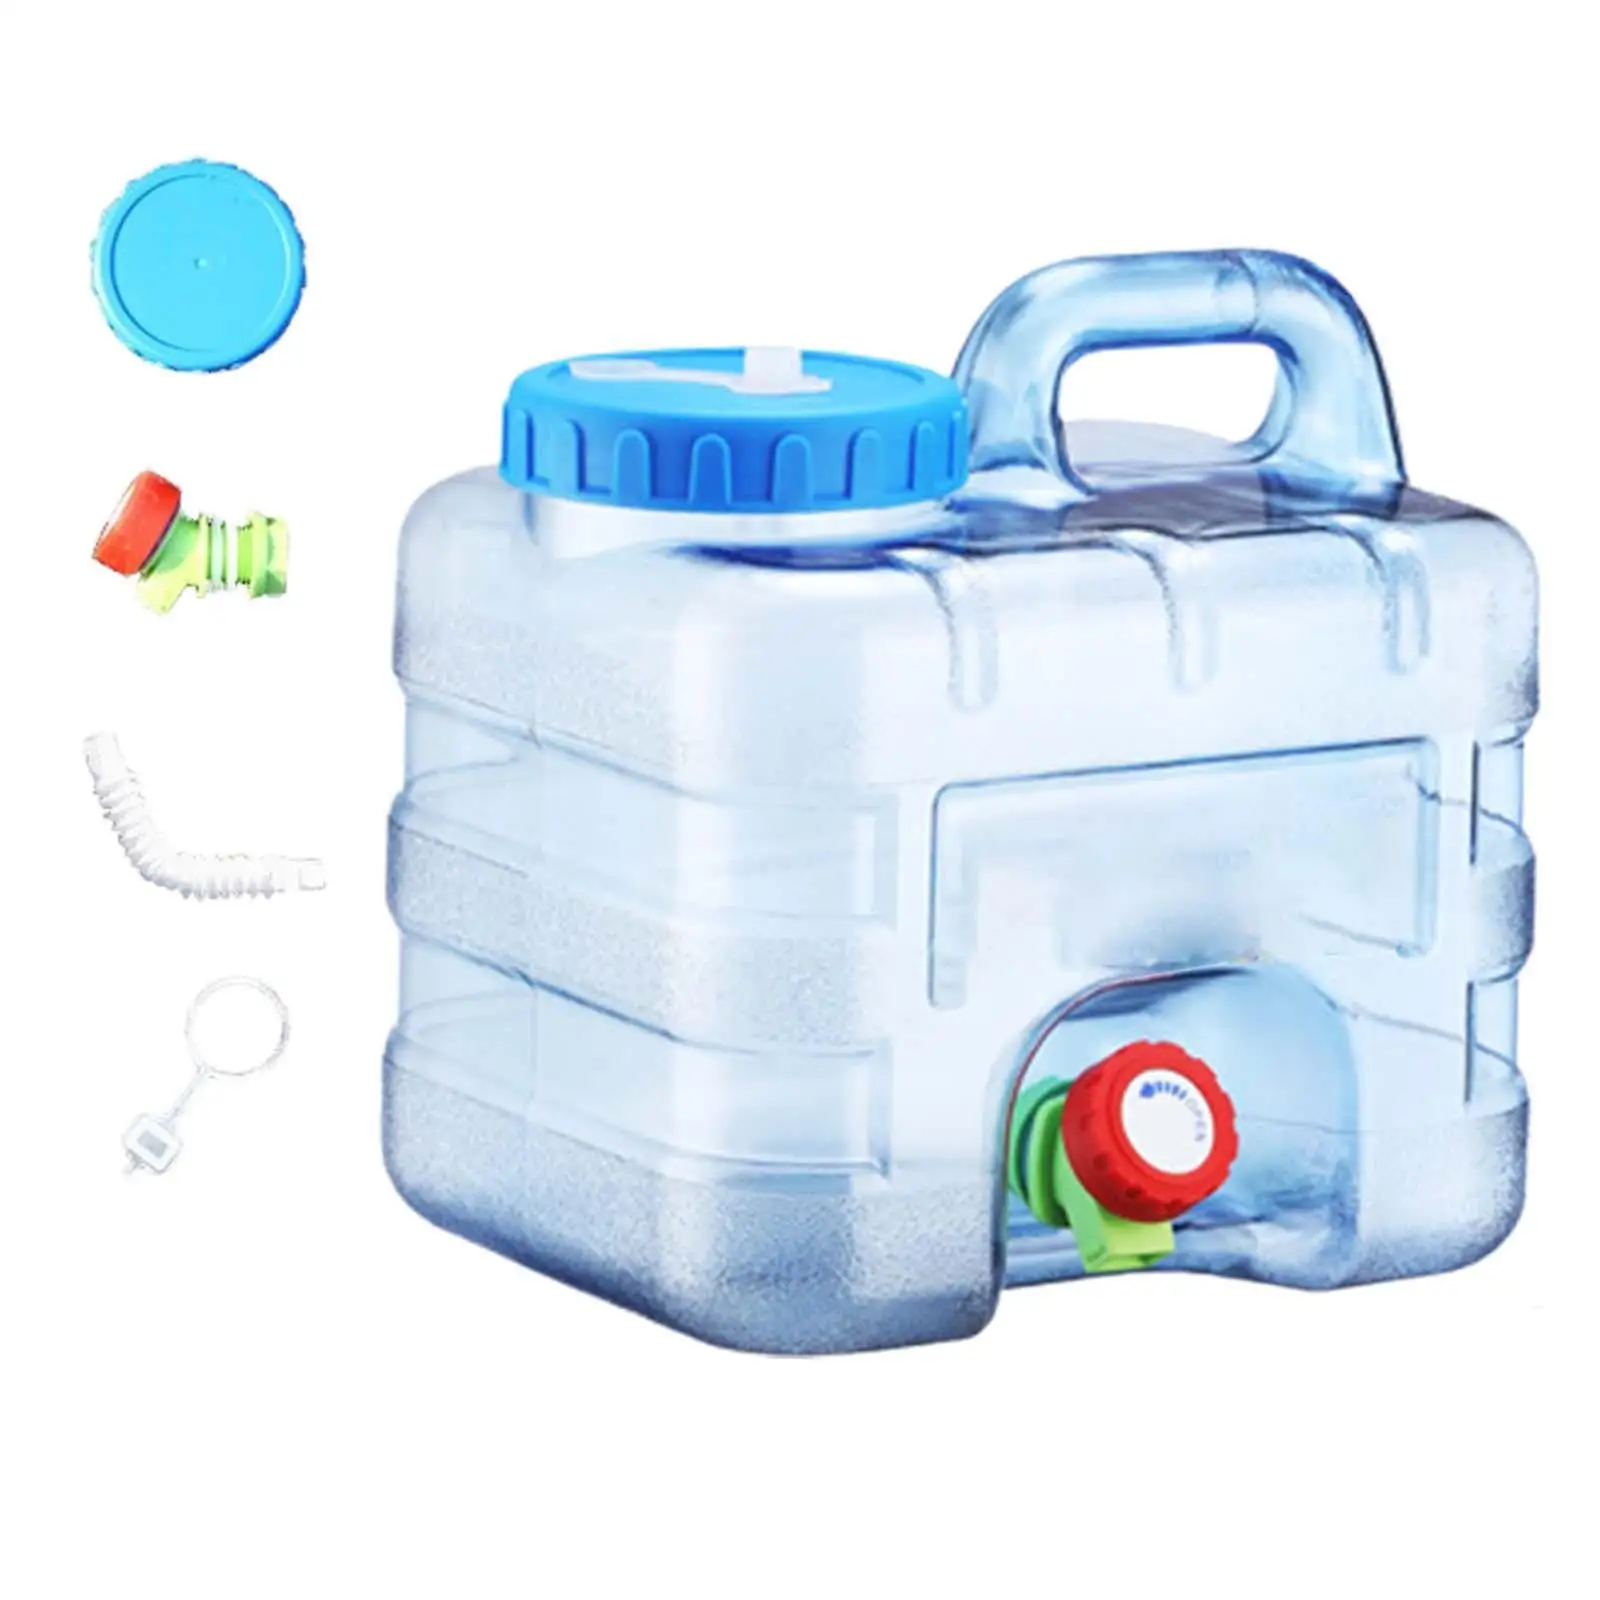 Portable Water Tank Water Storage Container Space Saving Versatile Lightweight Water Barrel for Picnic, Hiking, Family Travel